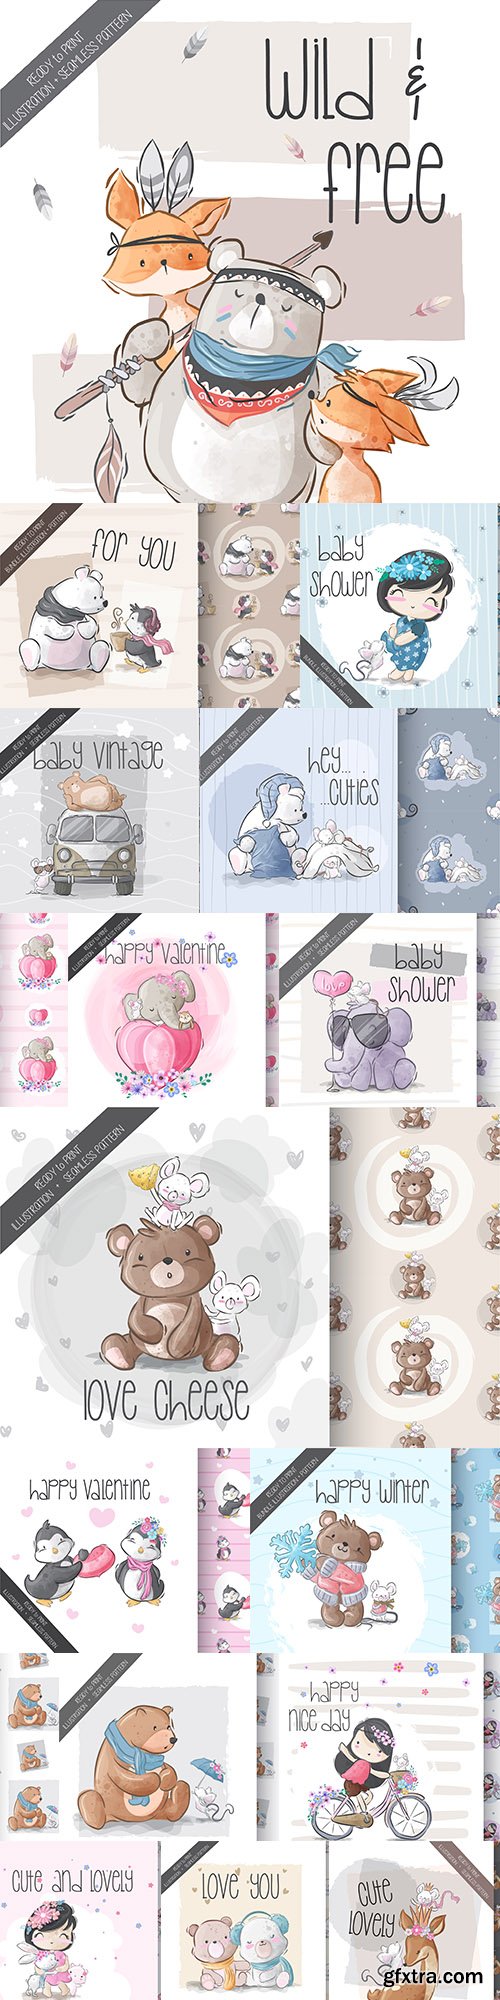 Baby and funny animal illustrations seamless pattern big collection